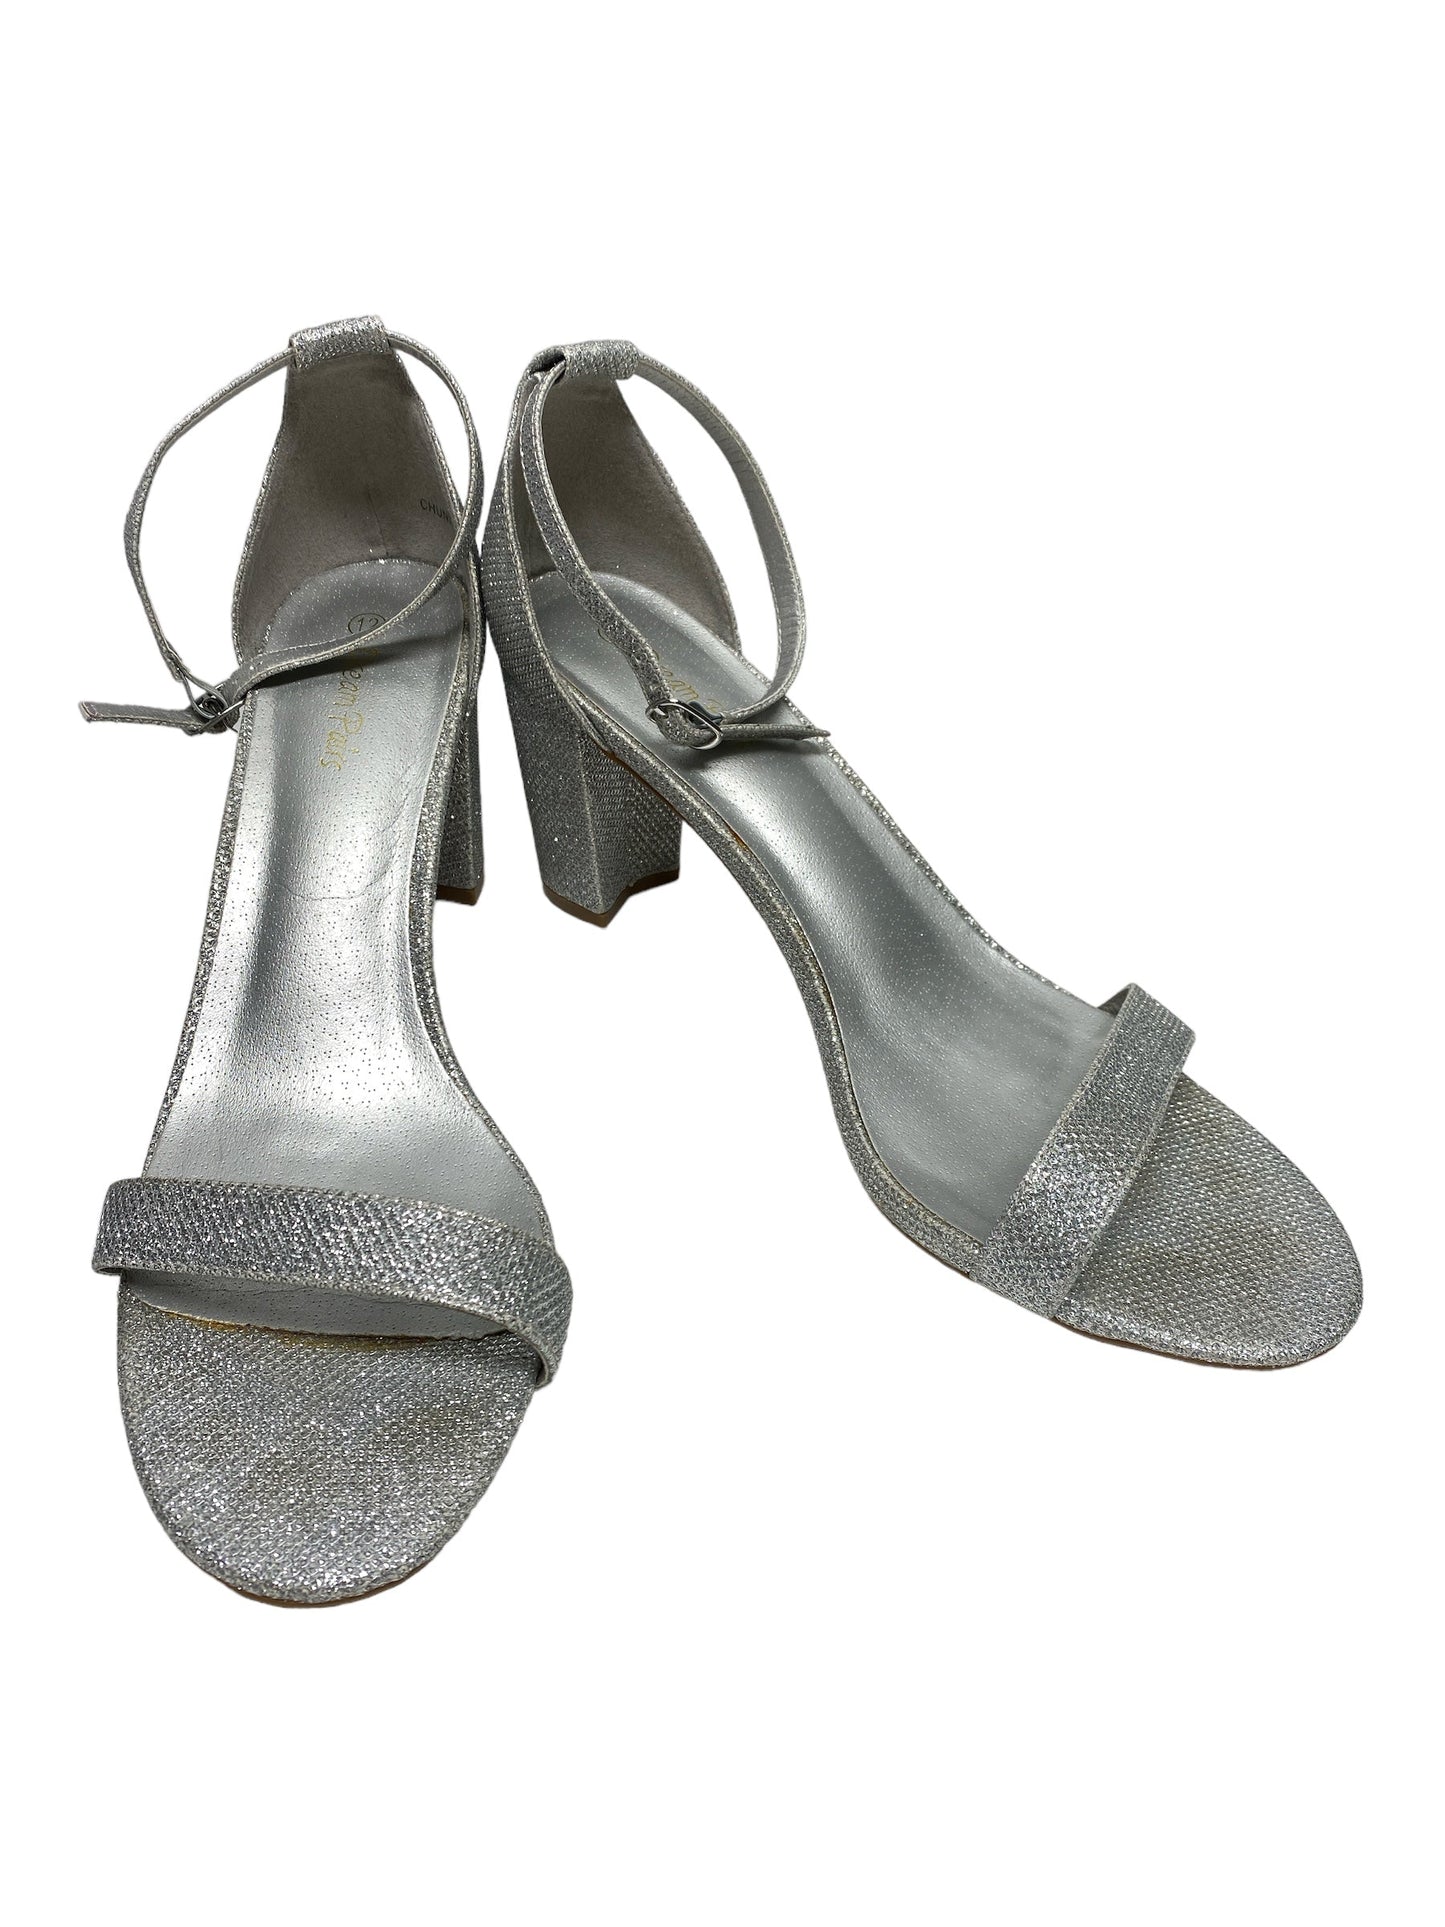 Silver Shoes Heels Block Clothes Mentor, Size 12